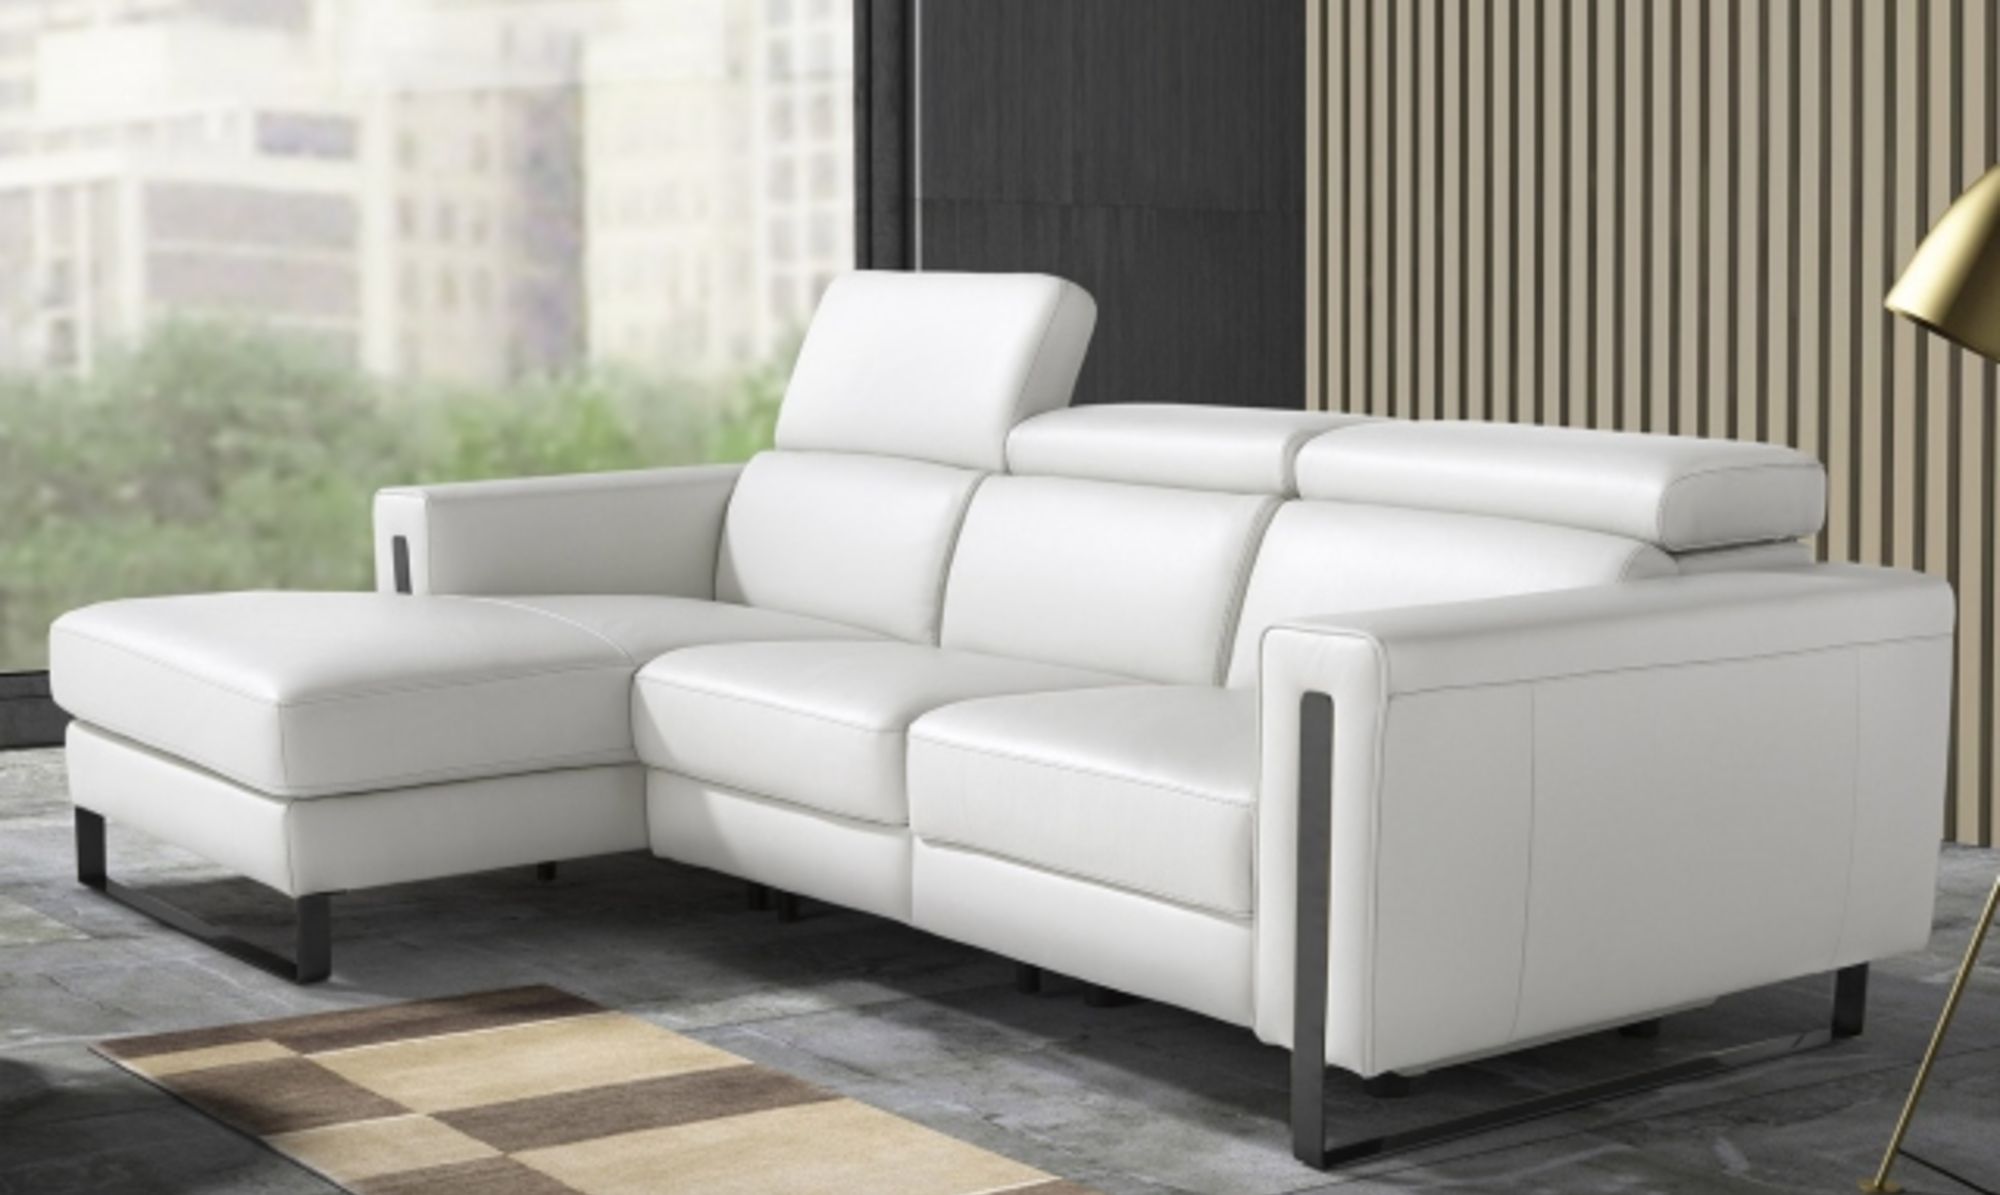 White Leather Sofa Fishpools Lifestyle, Leather White Couch